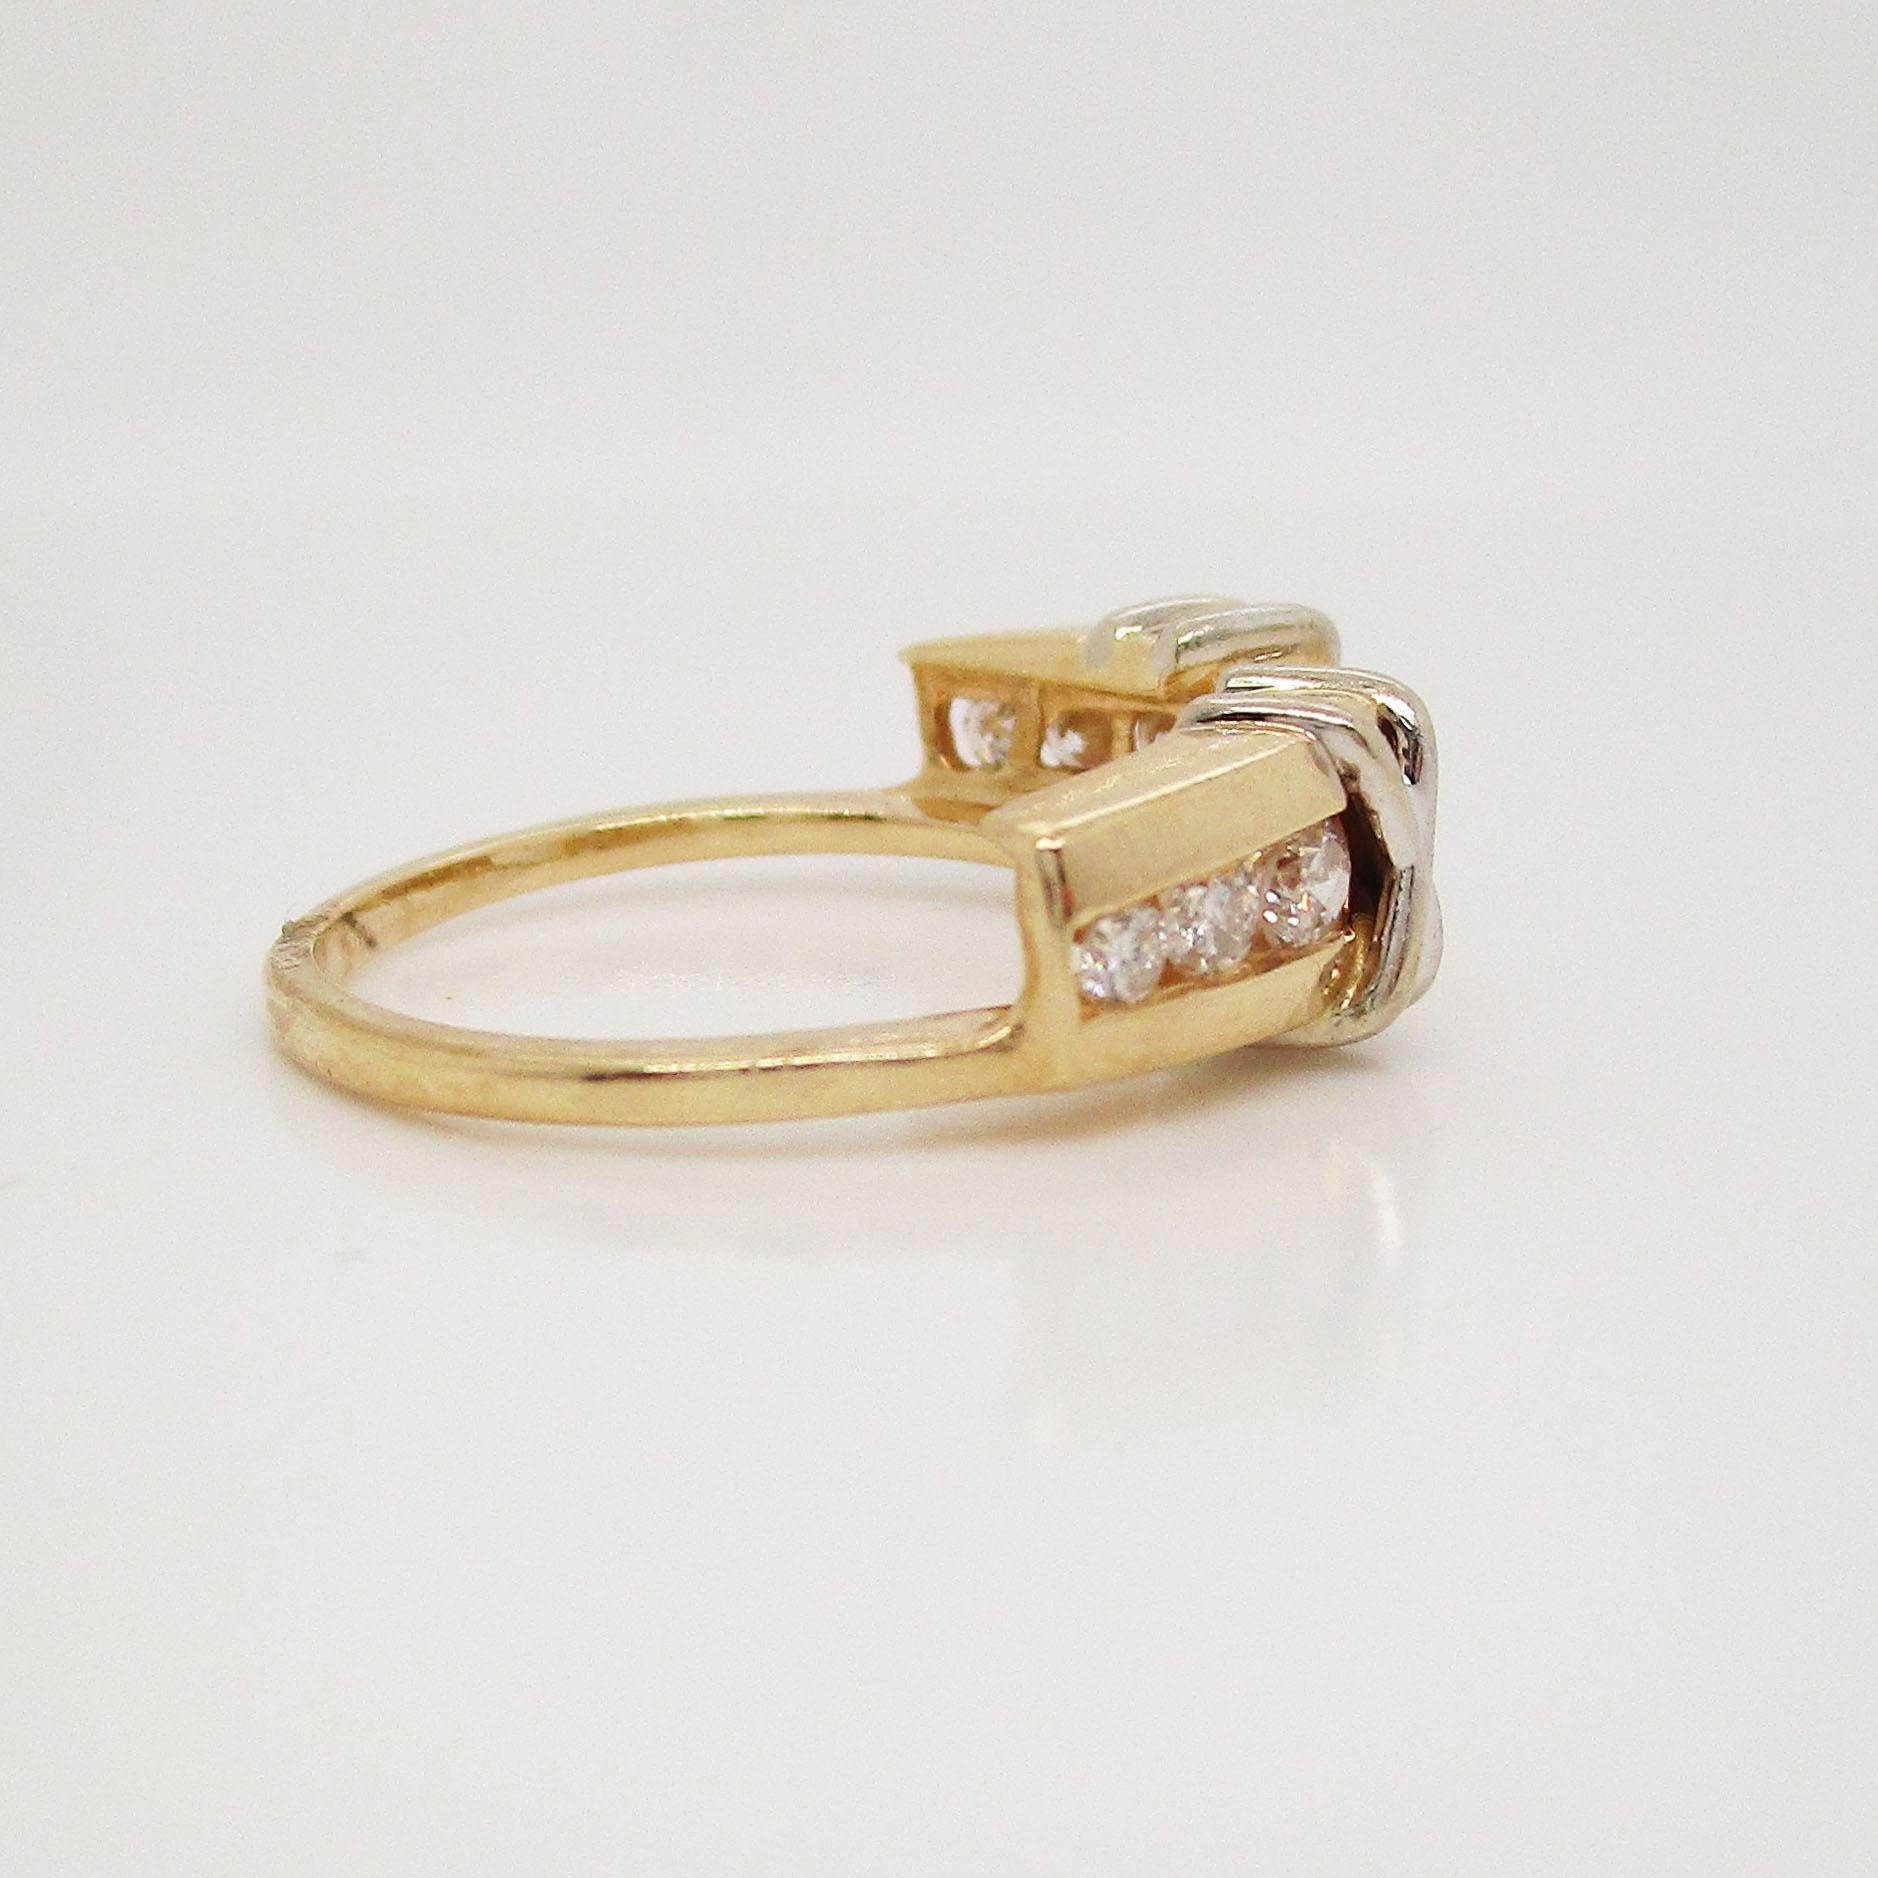 14K Two-Tone Channel Set Diamond Wedding Band Jacket In Good Condition For Sale In Lexington, KY